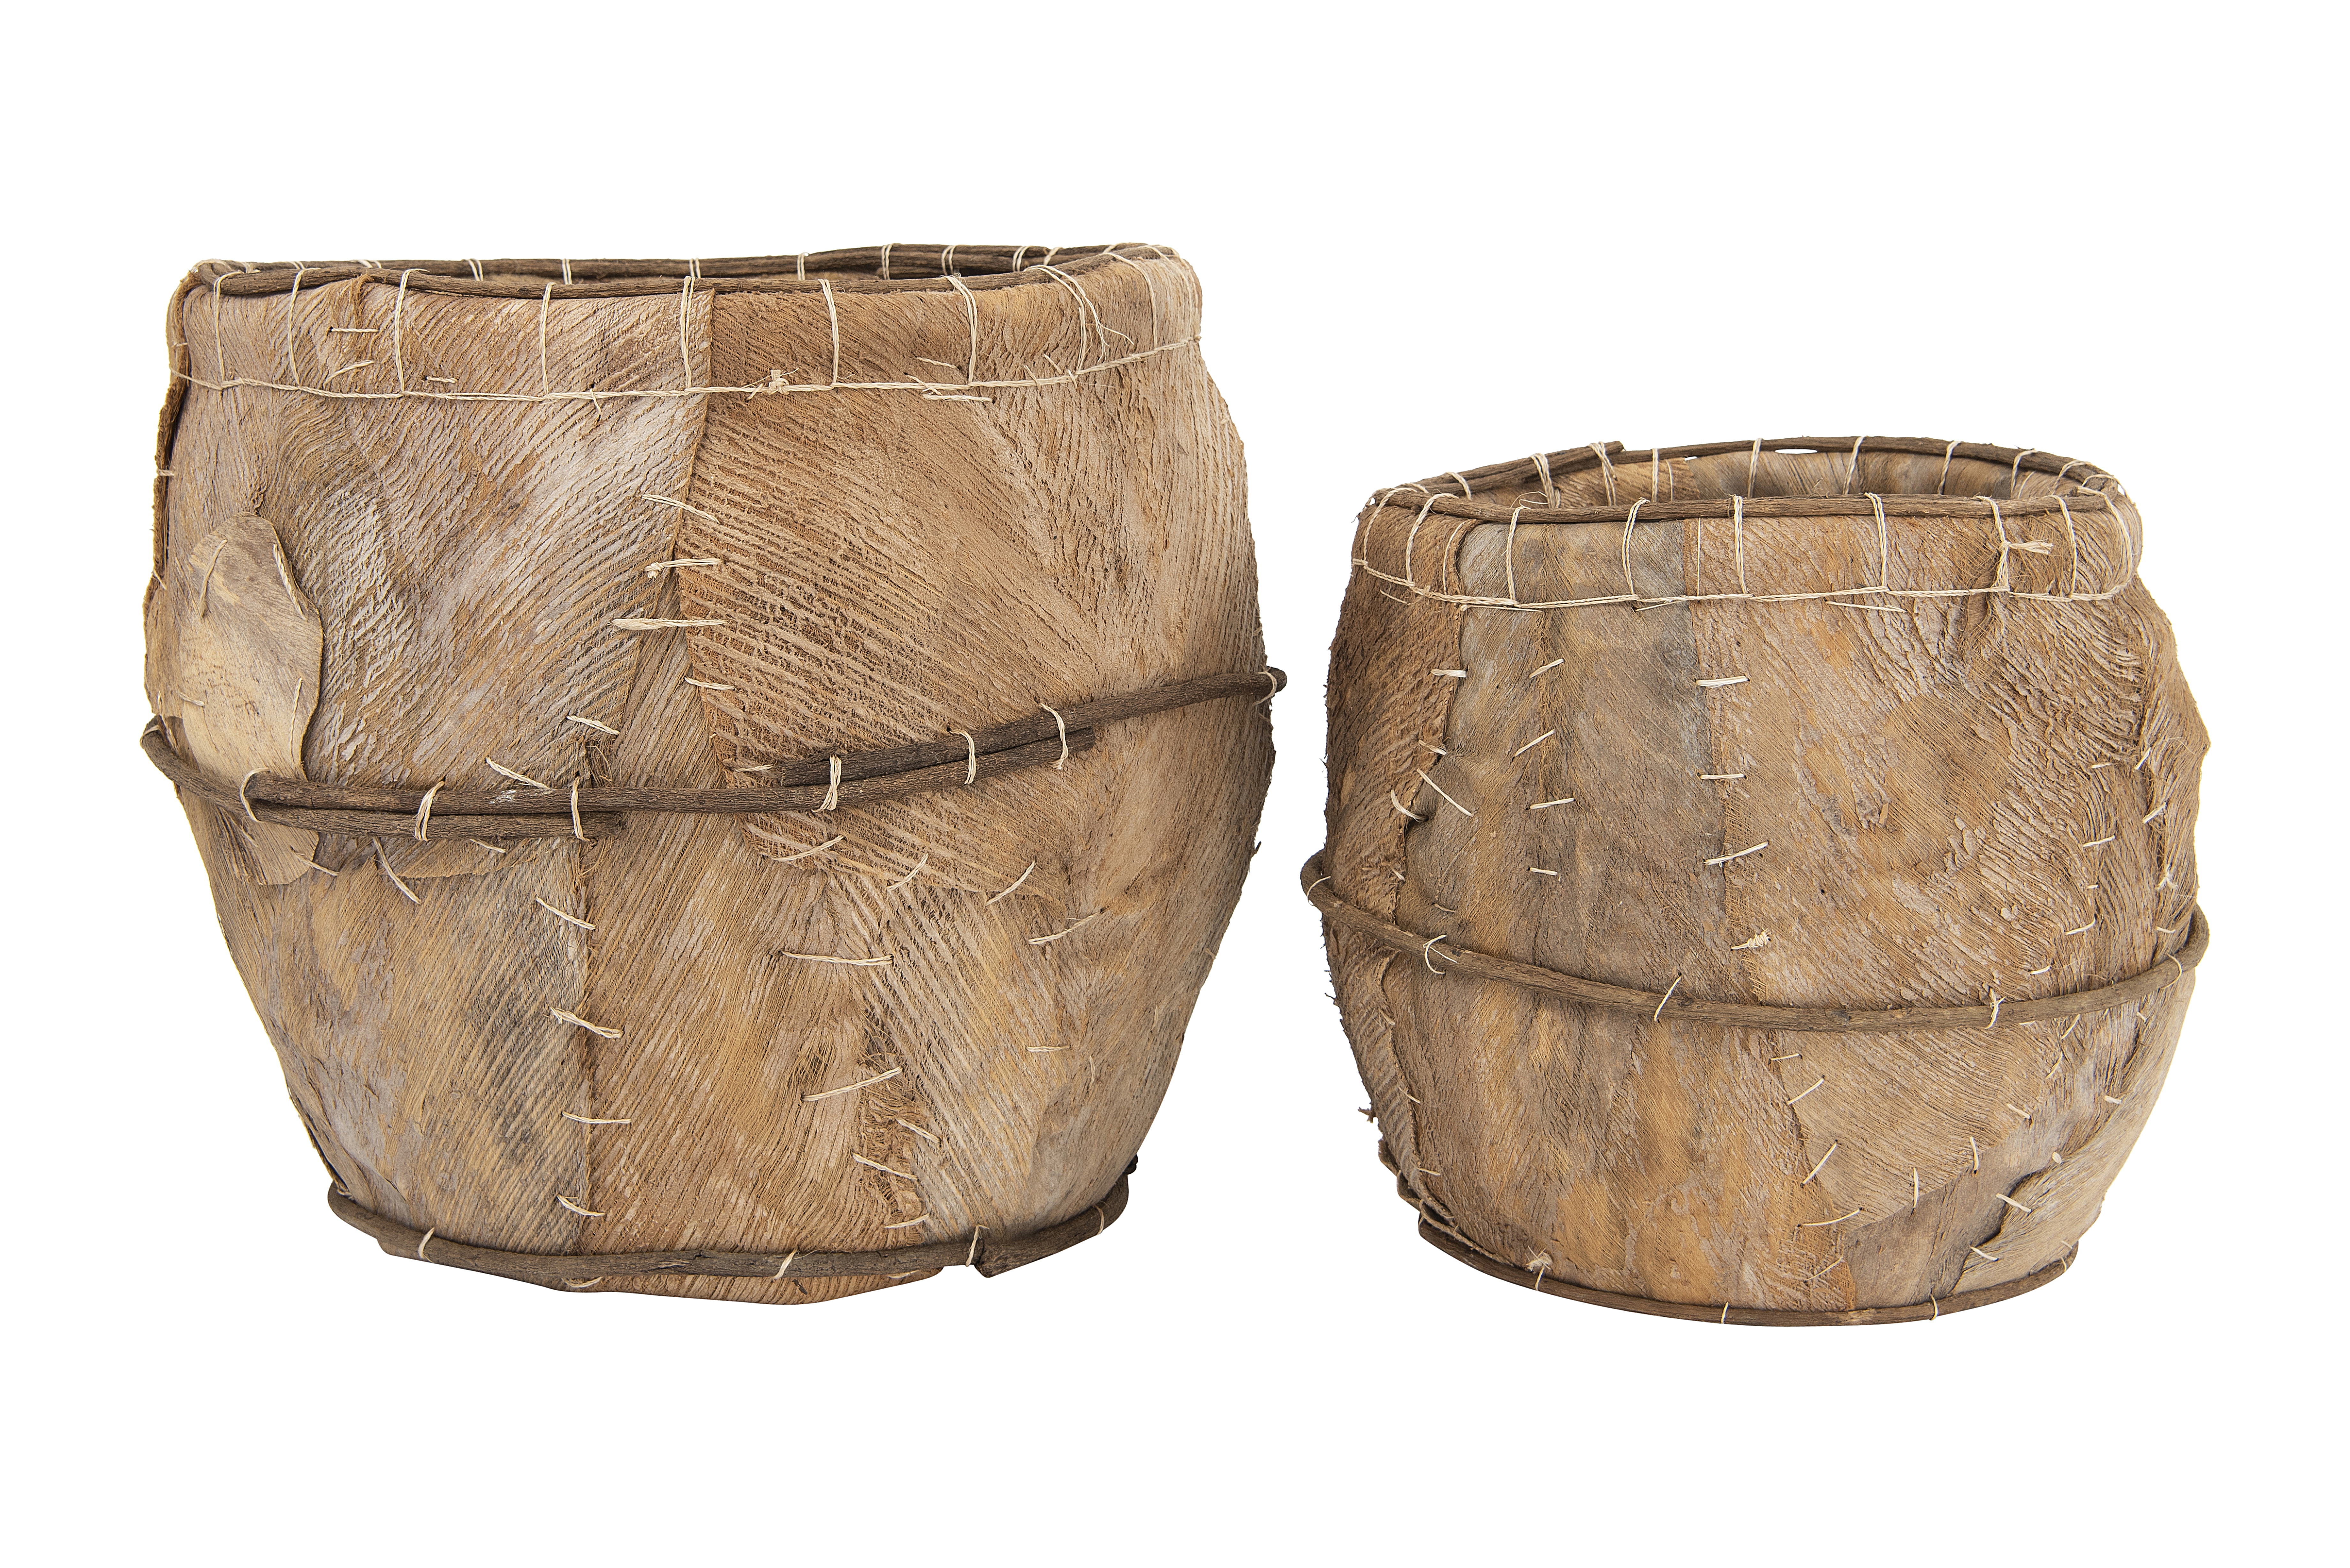 Handmade Coca Leaf Planters with Plastic Lining (Set of 2 Sizes/Hold 17" & 20" Pots) Each one will vary - Image 0